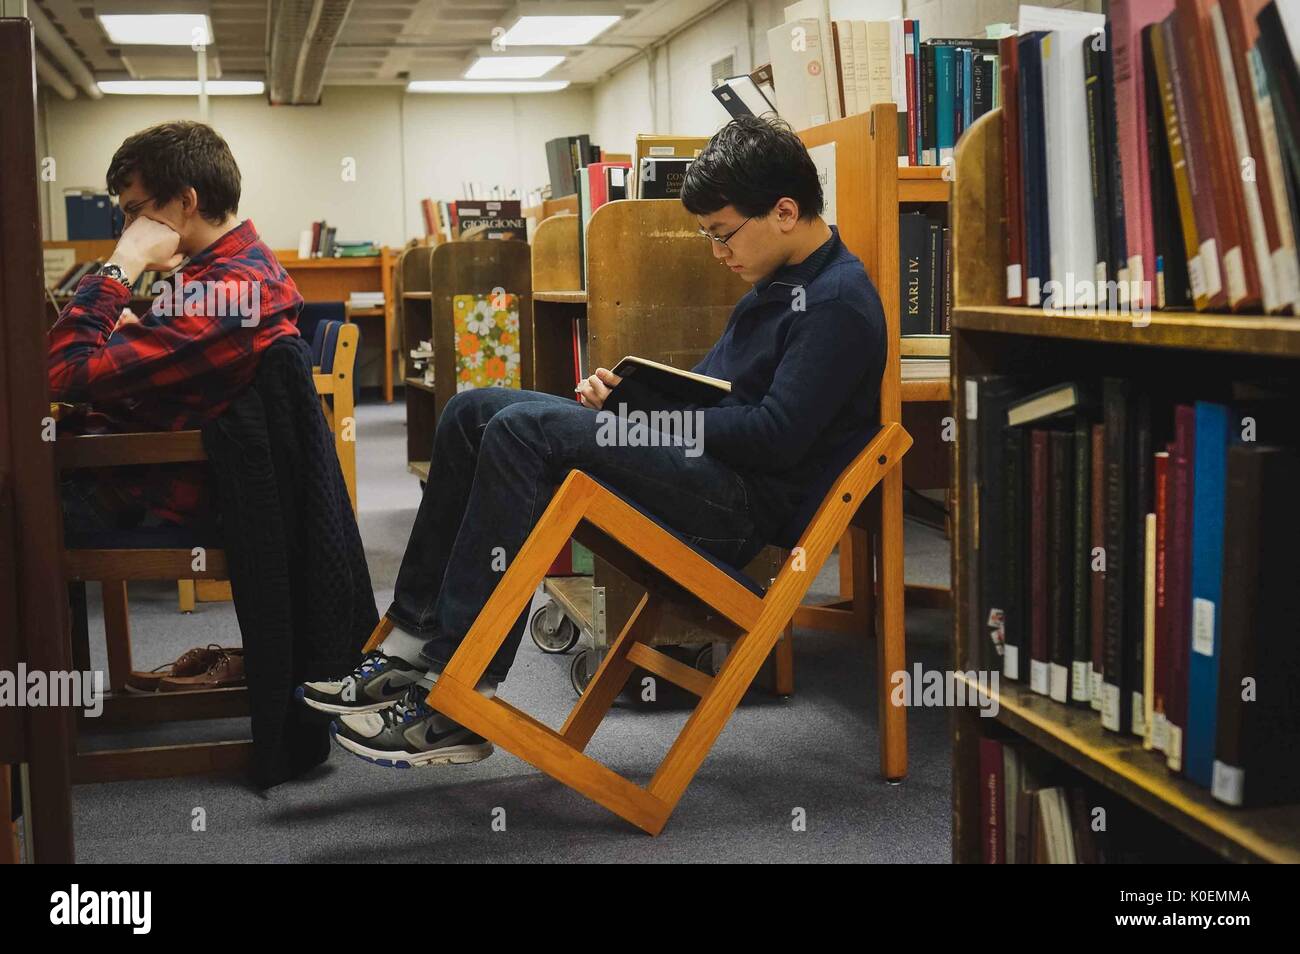 Surrounded by books, college students study, one of them leaning his chair back, in the Milton S. Eisenhower Library on the Homewood campus of the Johns Hopkins University in Baltimore, Maryland, 2014. Courtesy Eric Chen. Stock Photo